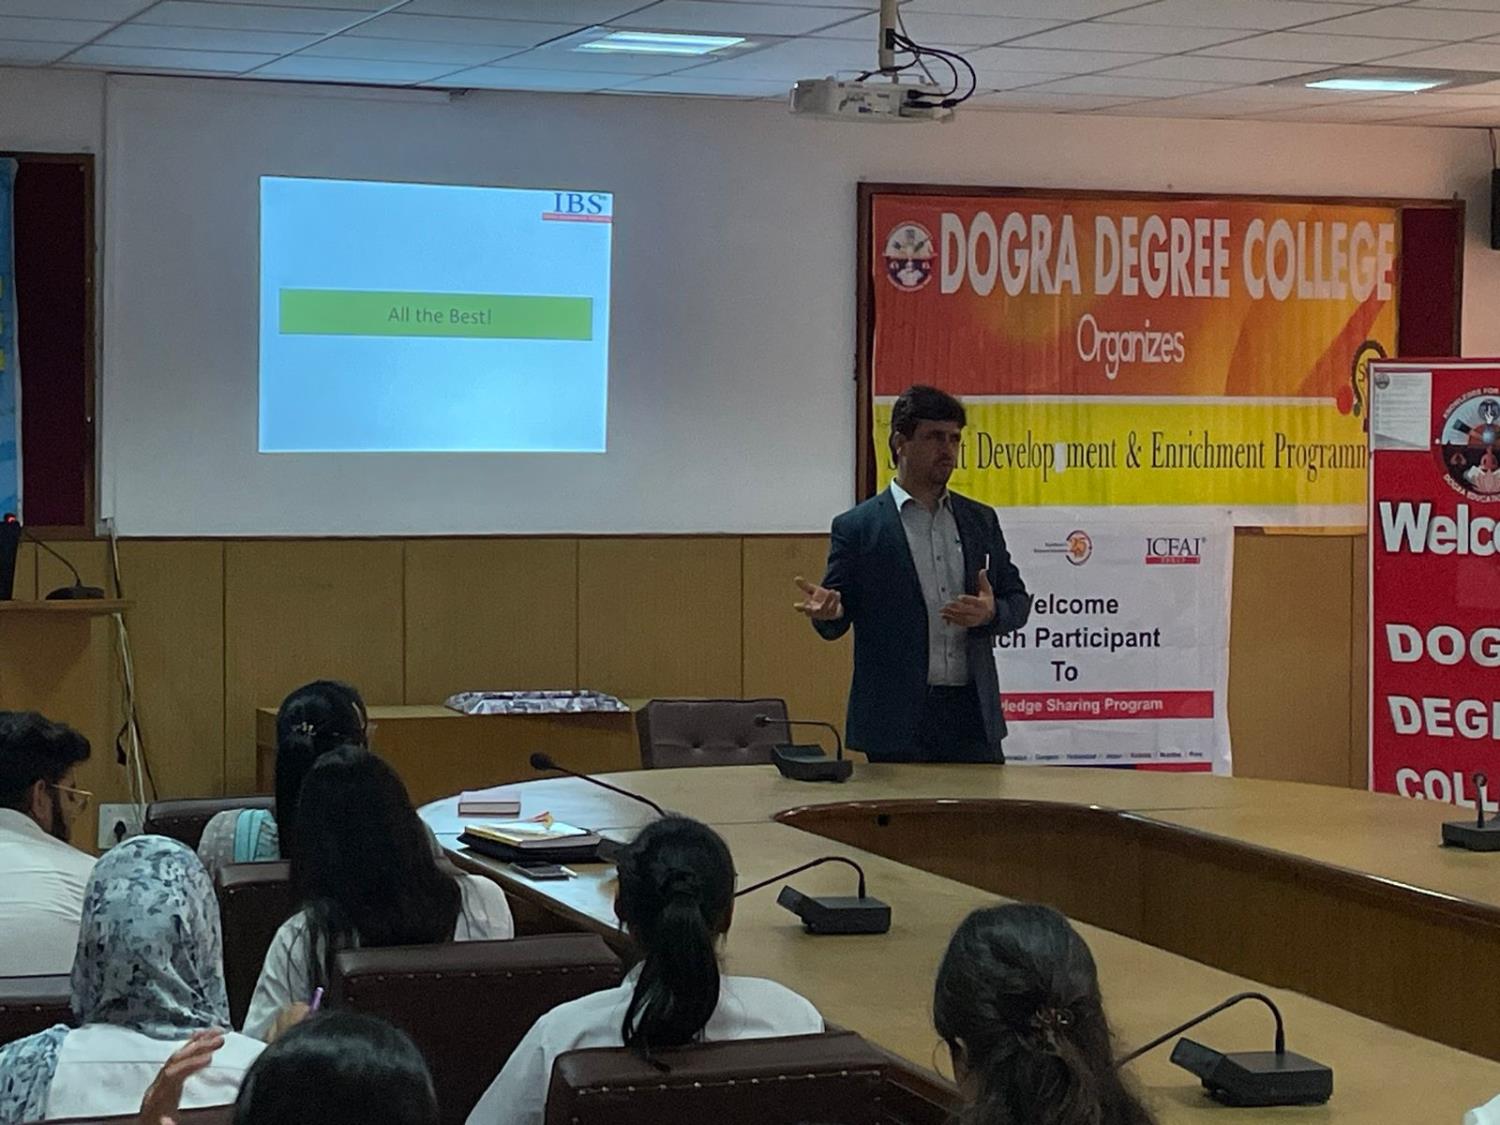 Dogra degree college organise students knowledge sharing program on corporate expectation from campus to cubicles